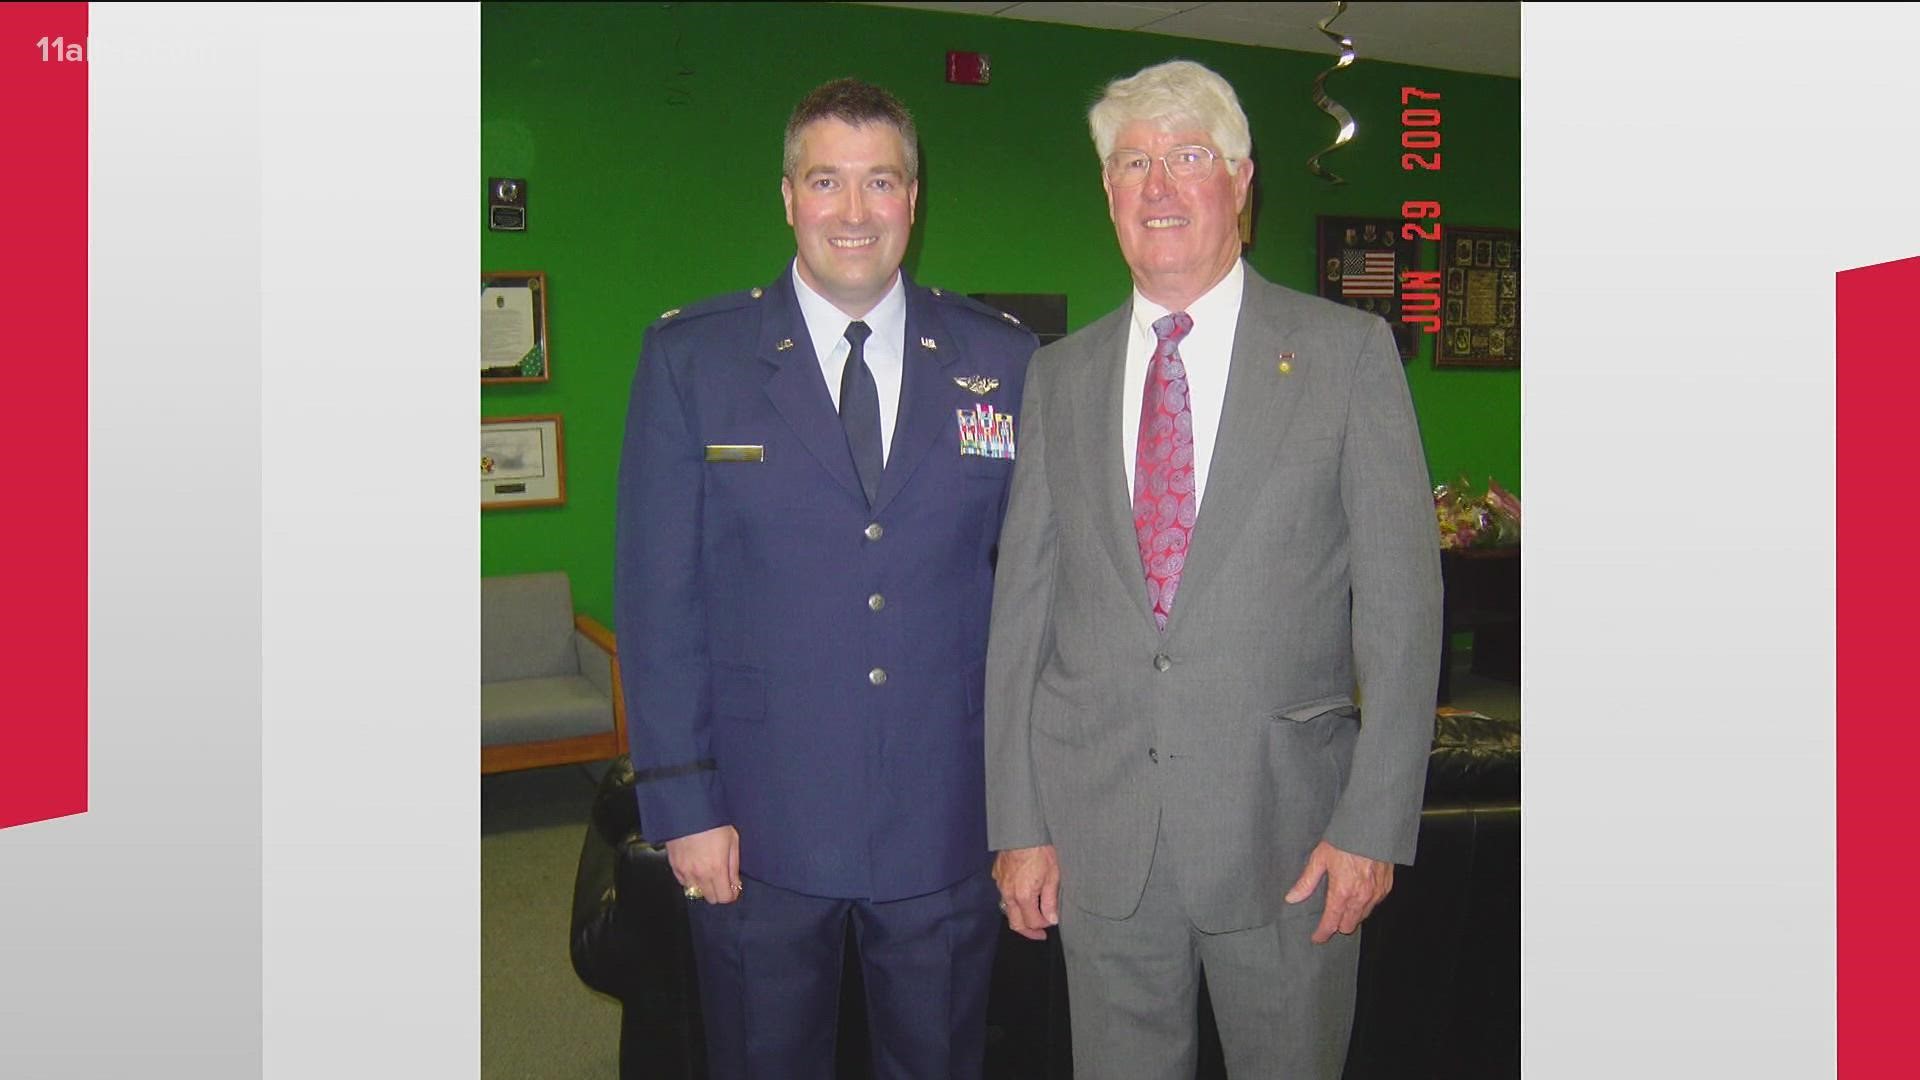 Brian Stone helped coordinate aircraft in the wake of 9/11 terrorist attacks.